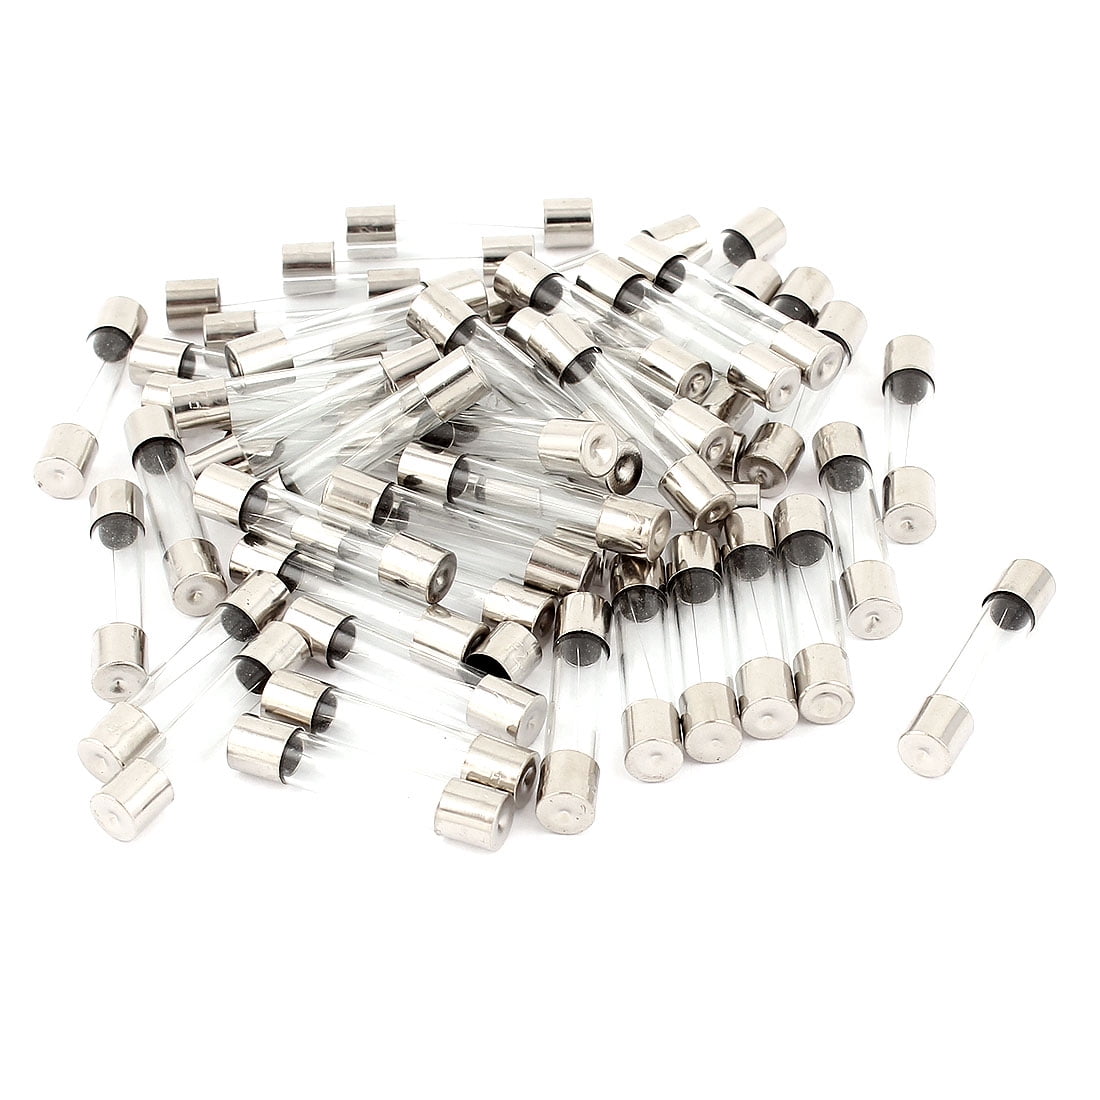 Superior Quality. 1A to 5A 5 X 20mm x 5mm Fast Acting Quick Blow Glass Fuses 